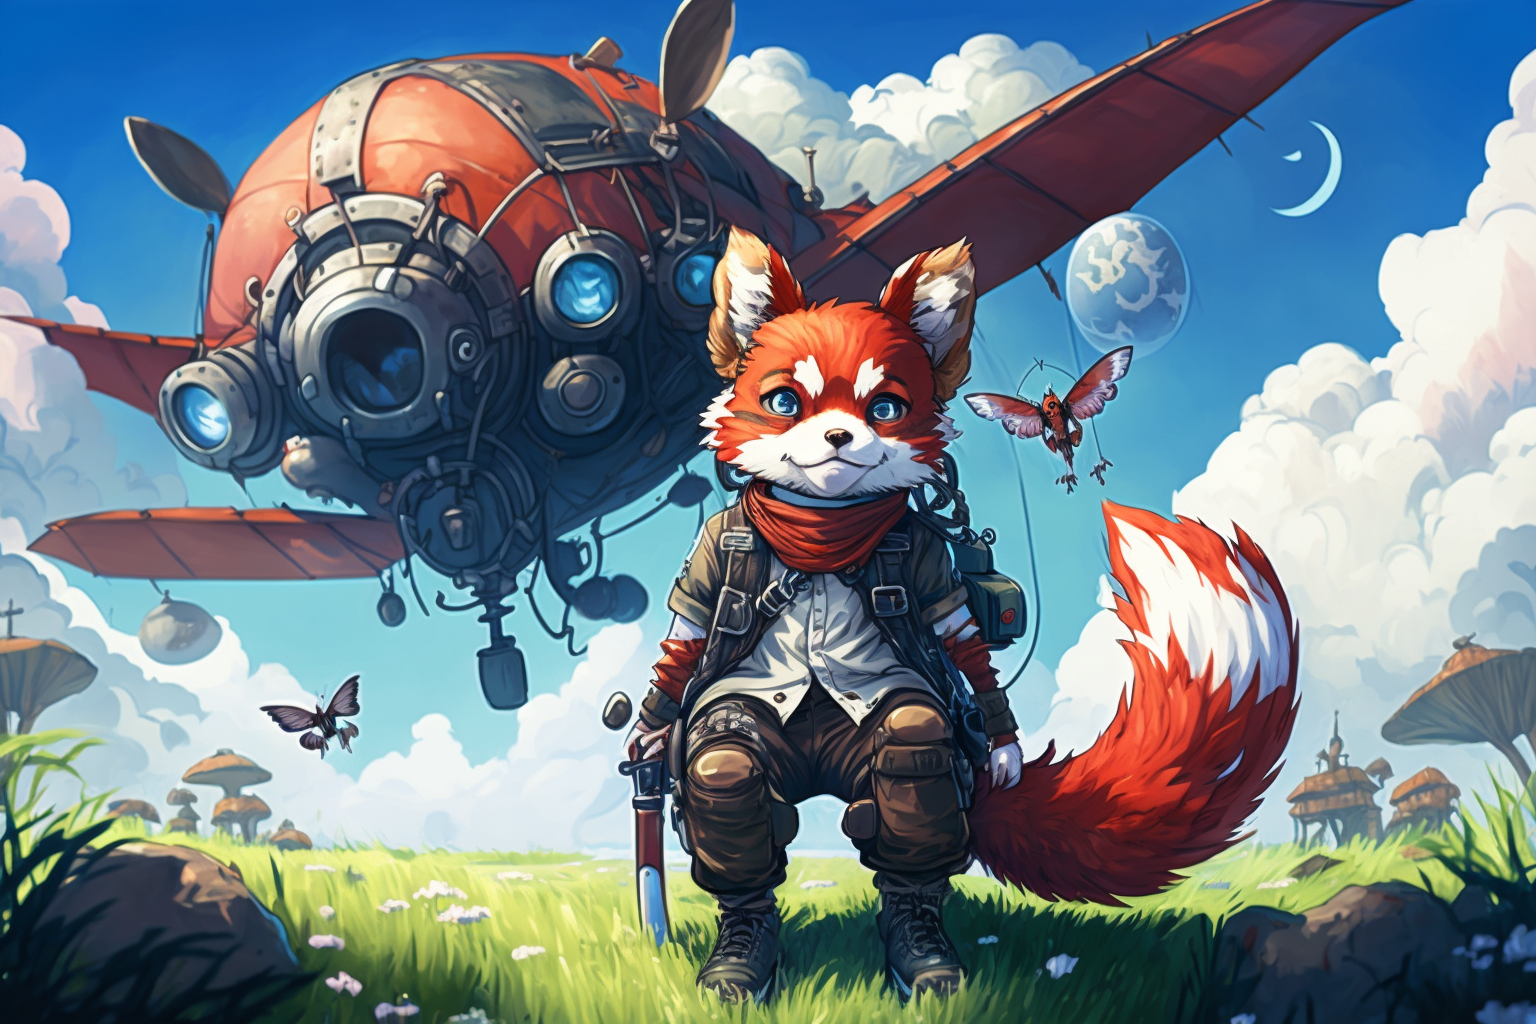 MrNoMbre_a_cute_and_fluffy_red_panda_with_pilot_outfit_landing__e023ff94-60fb-42fe-869d-3ed4cec53bc8.png